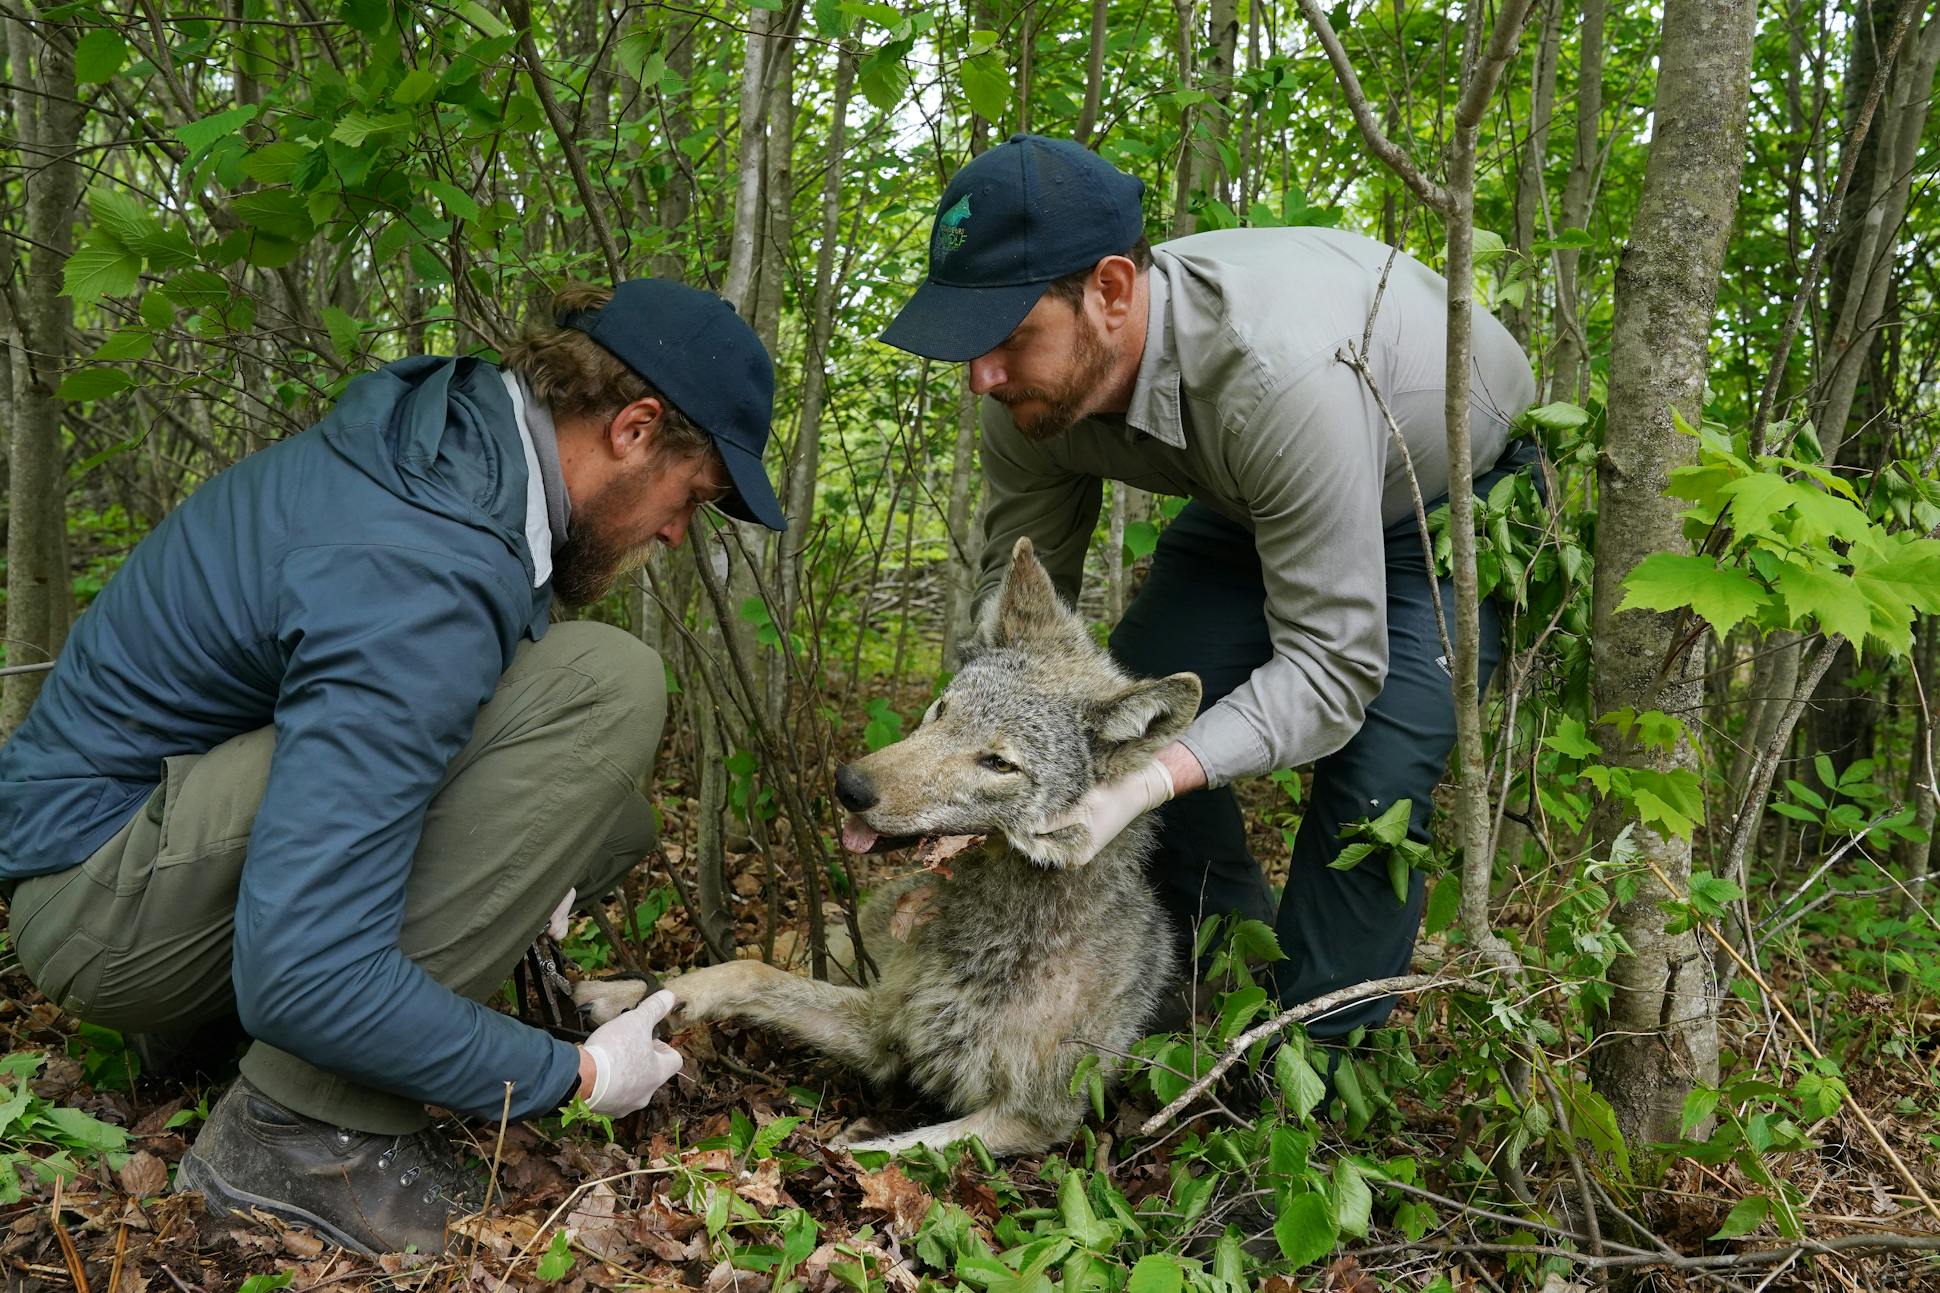 Homkes, left, and Gable of the Voyageurs Wolf Project removed a padded research trap from sedated gray wolf O1T.